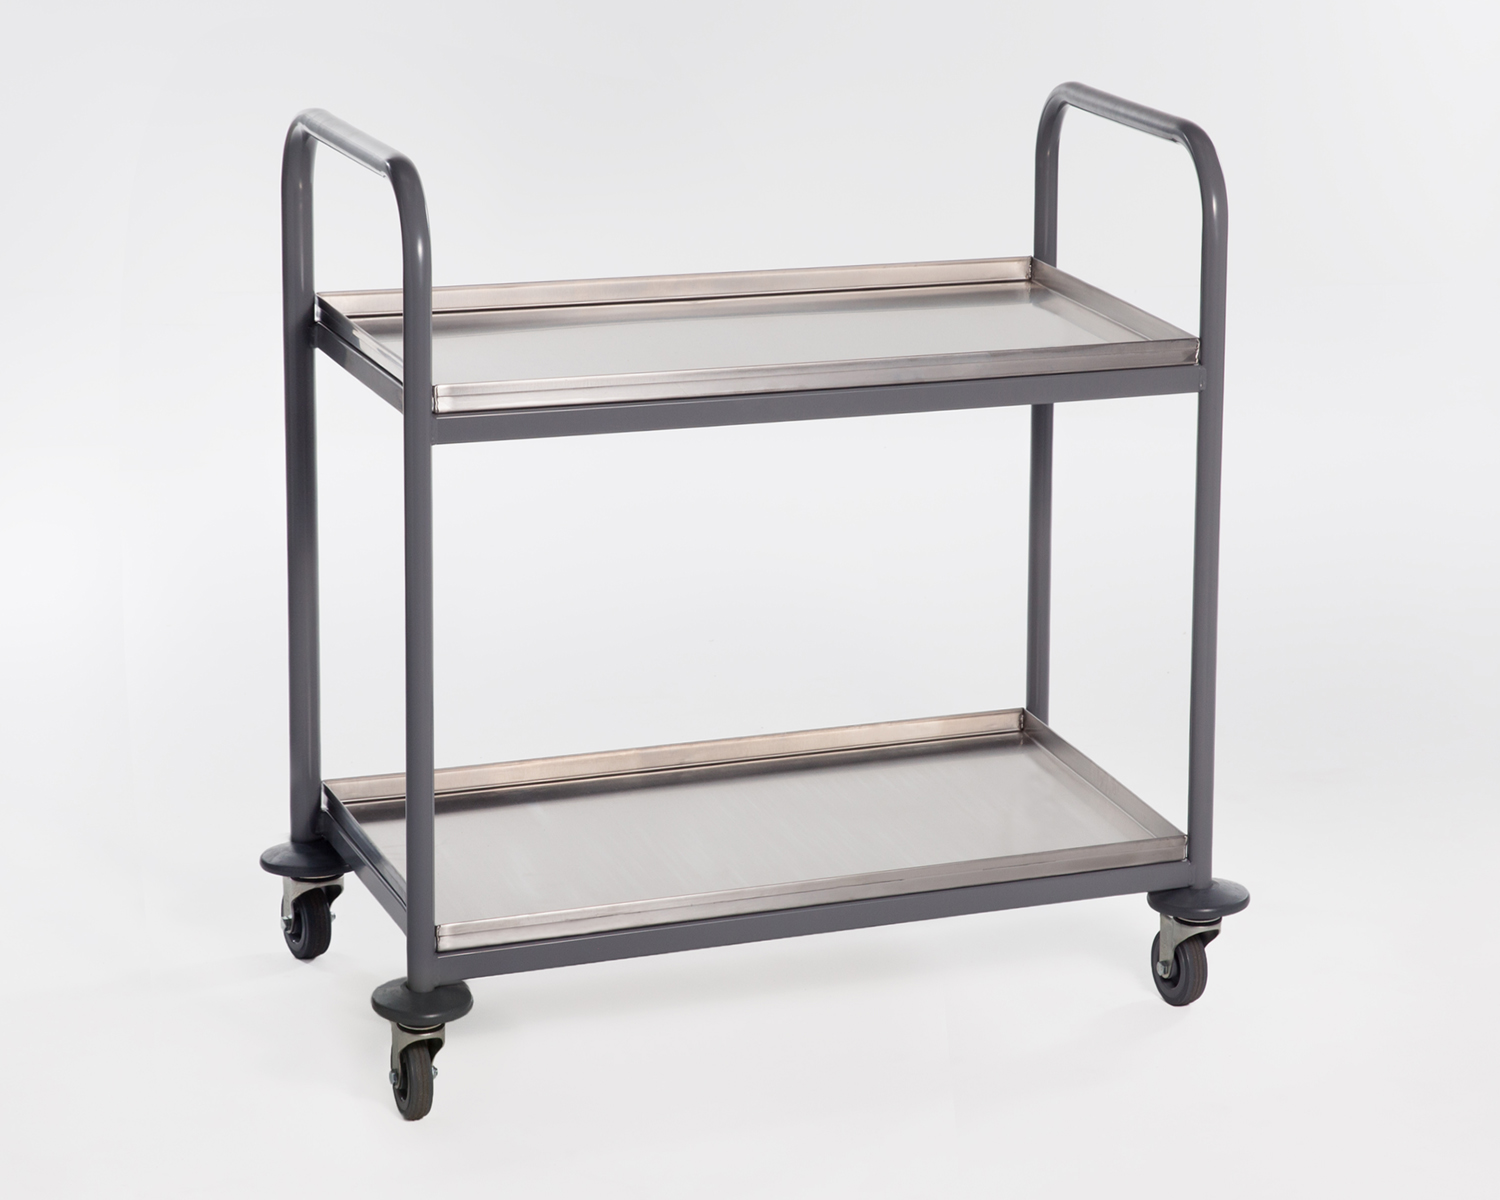 Laboratory Trolley Powdercoat with Stainless Steel Shelves copy